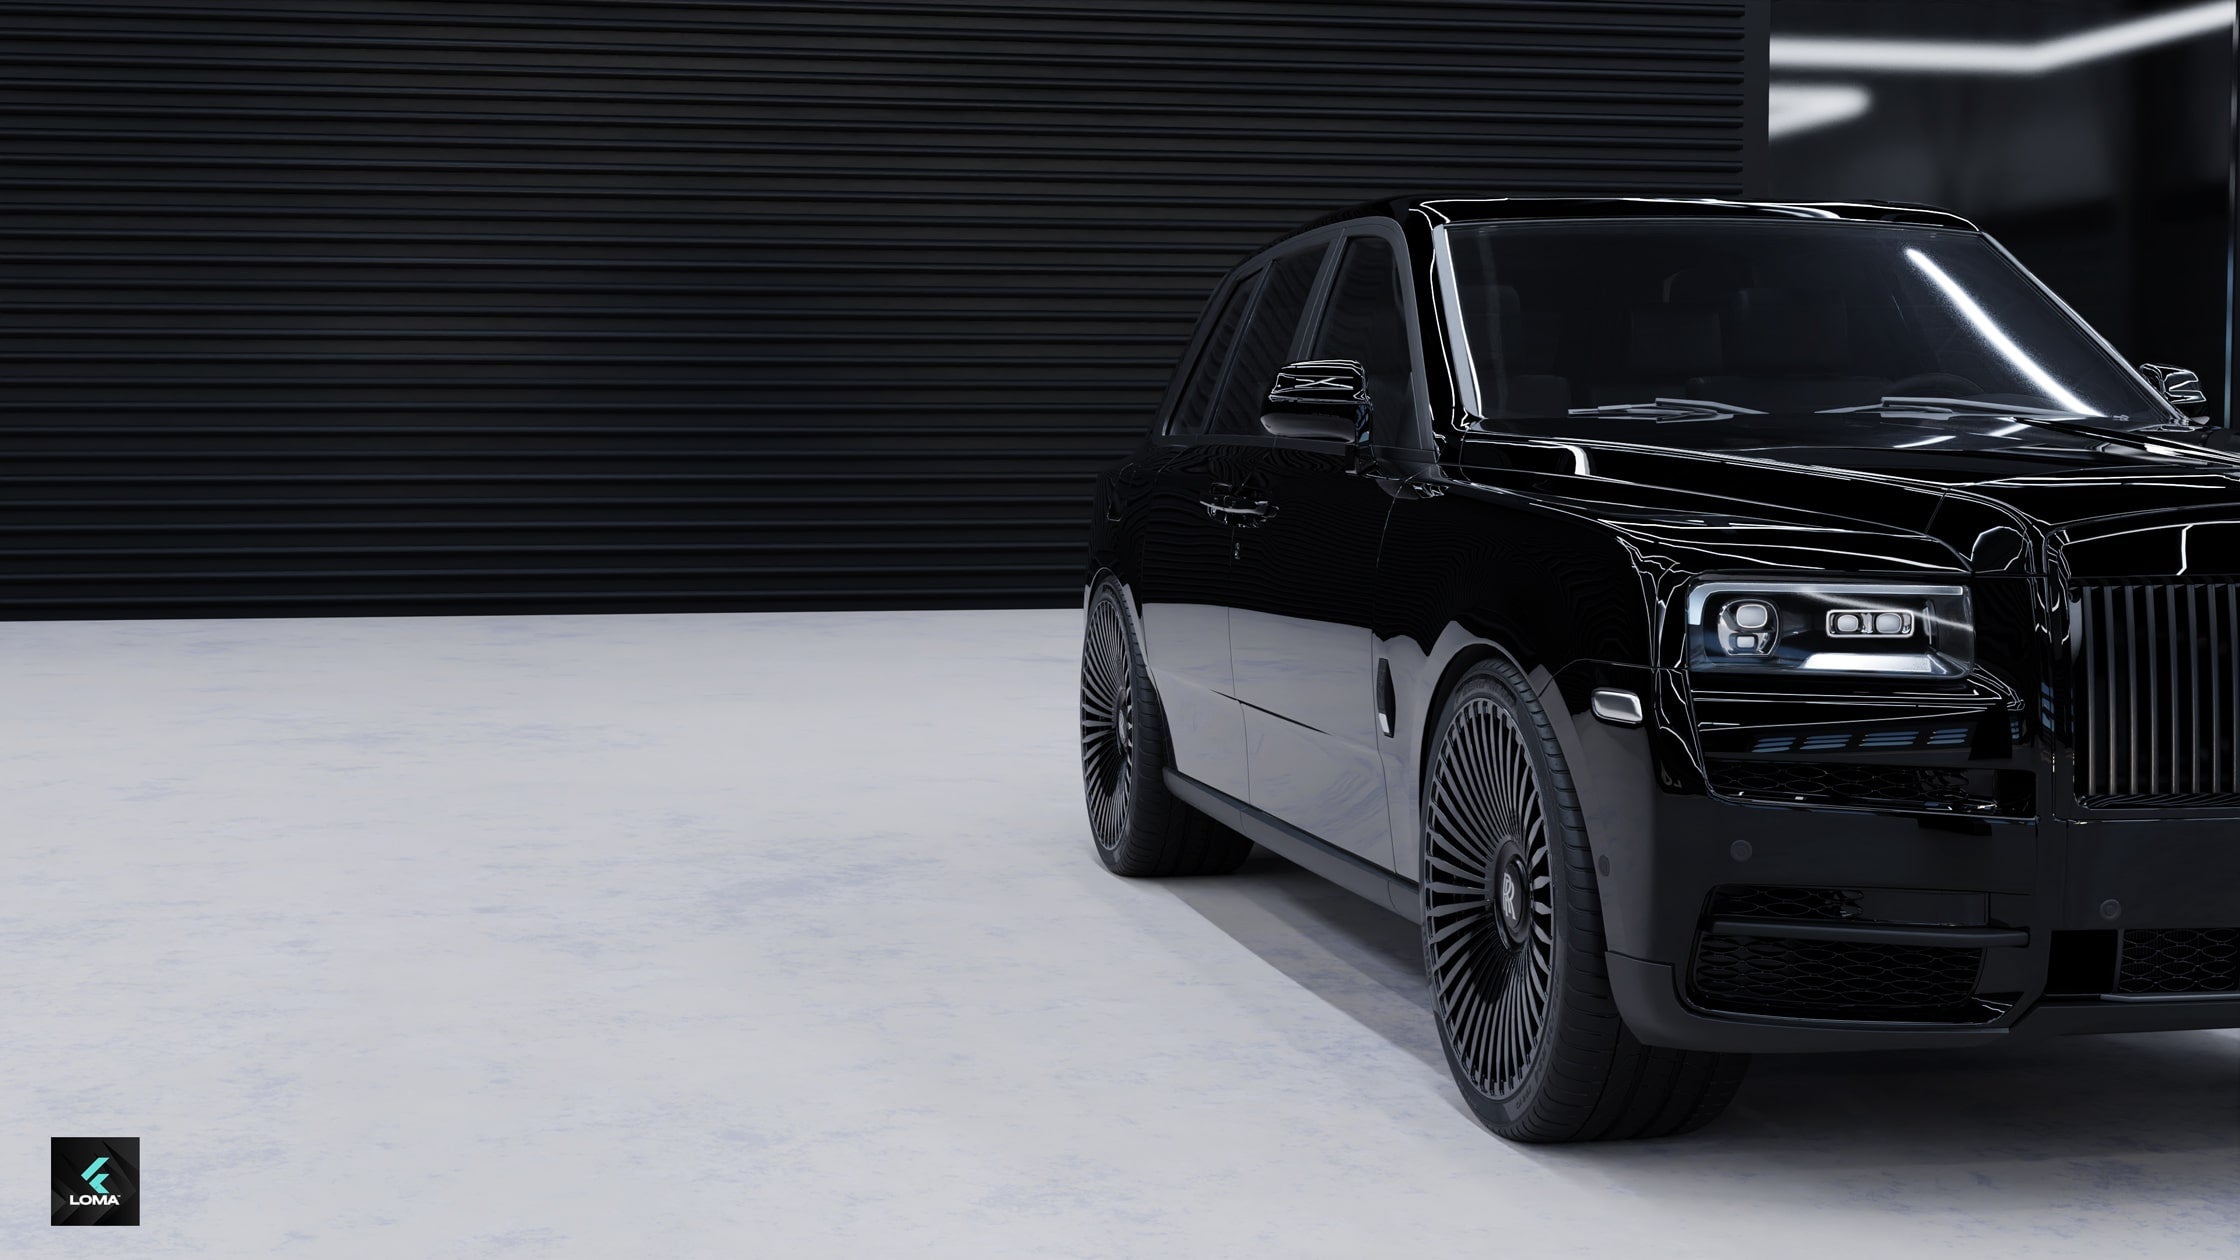 Rolls-Royce-Cullinan-on-LOMA-SPECTER-Custom-Forged-Luxury-Wheels-Rims-in-24-Inches-Showroom-7-min